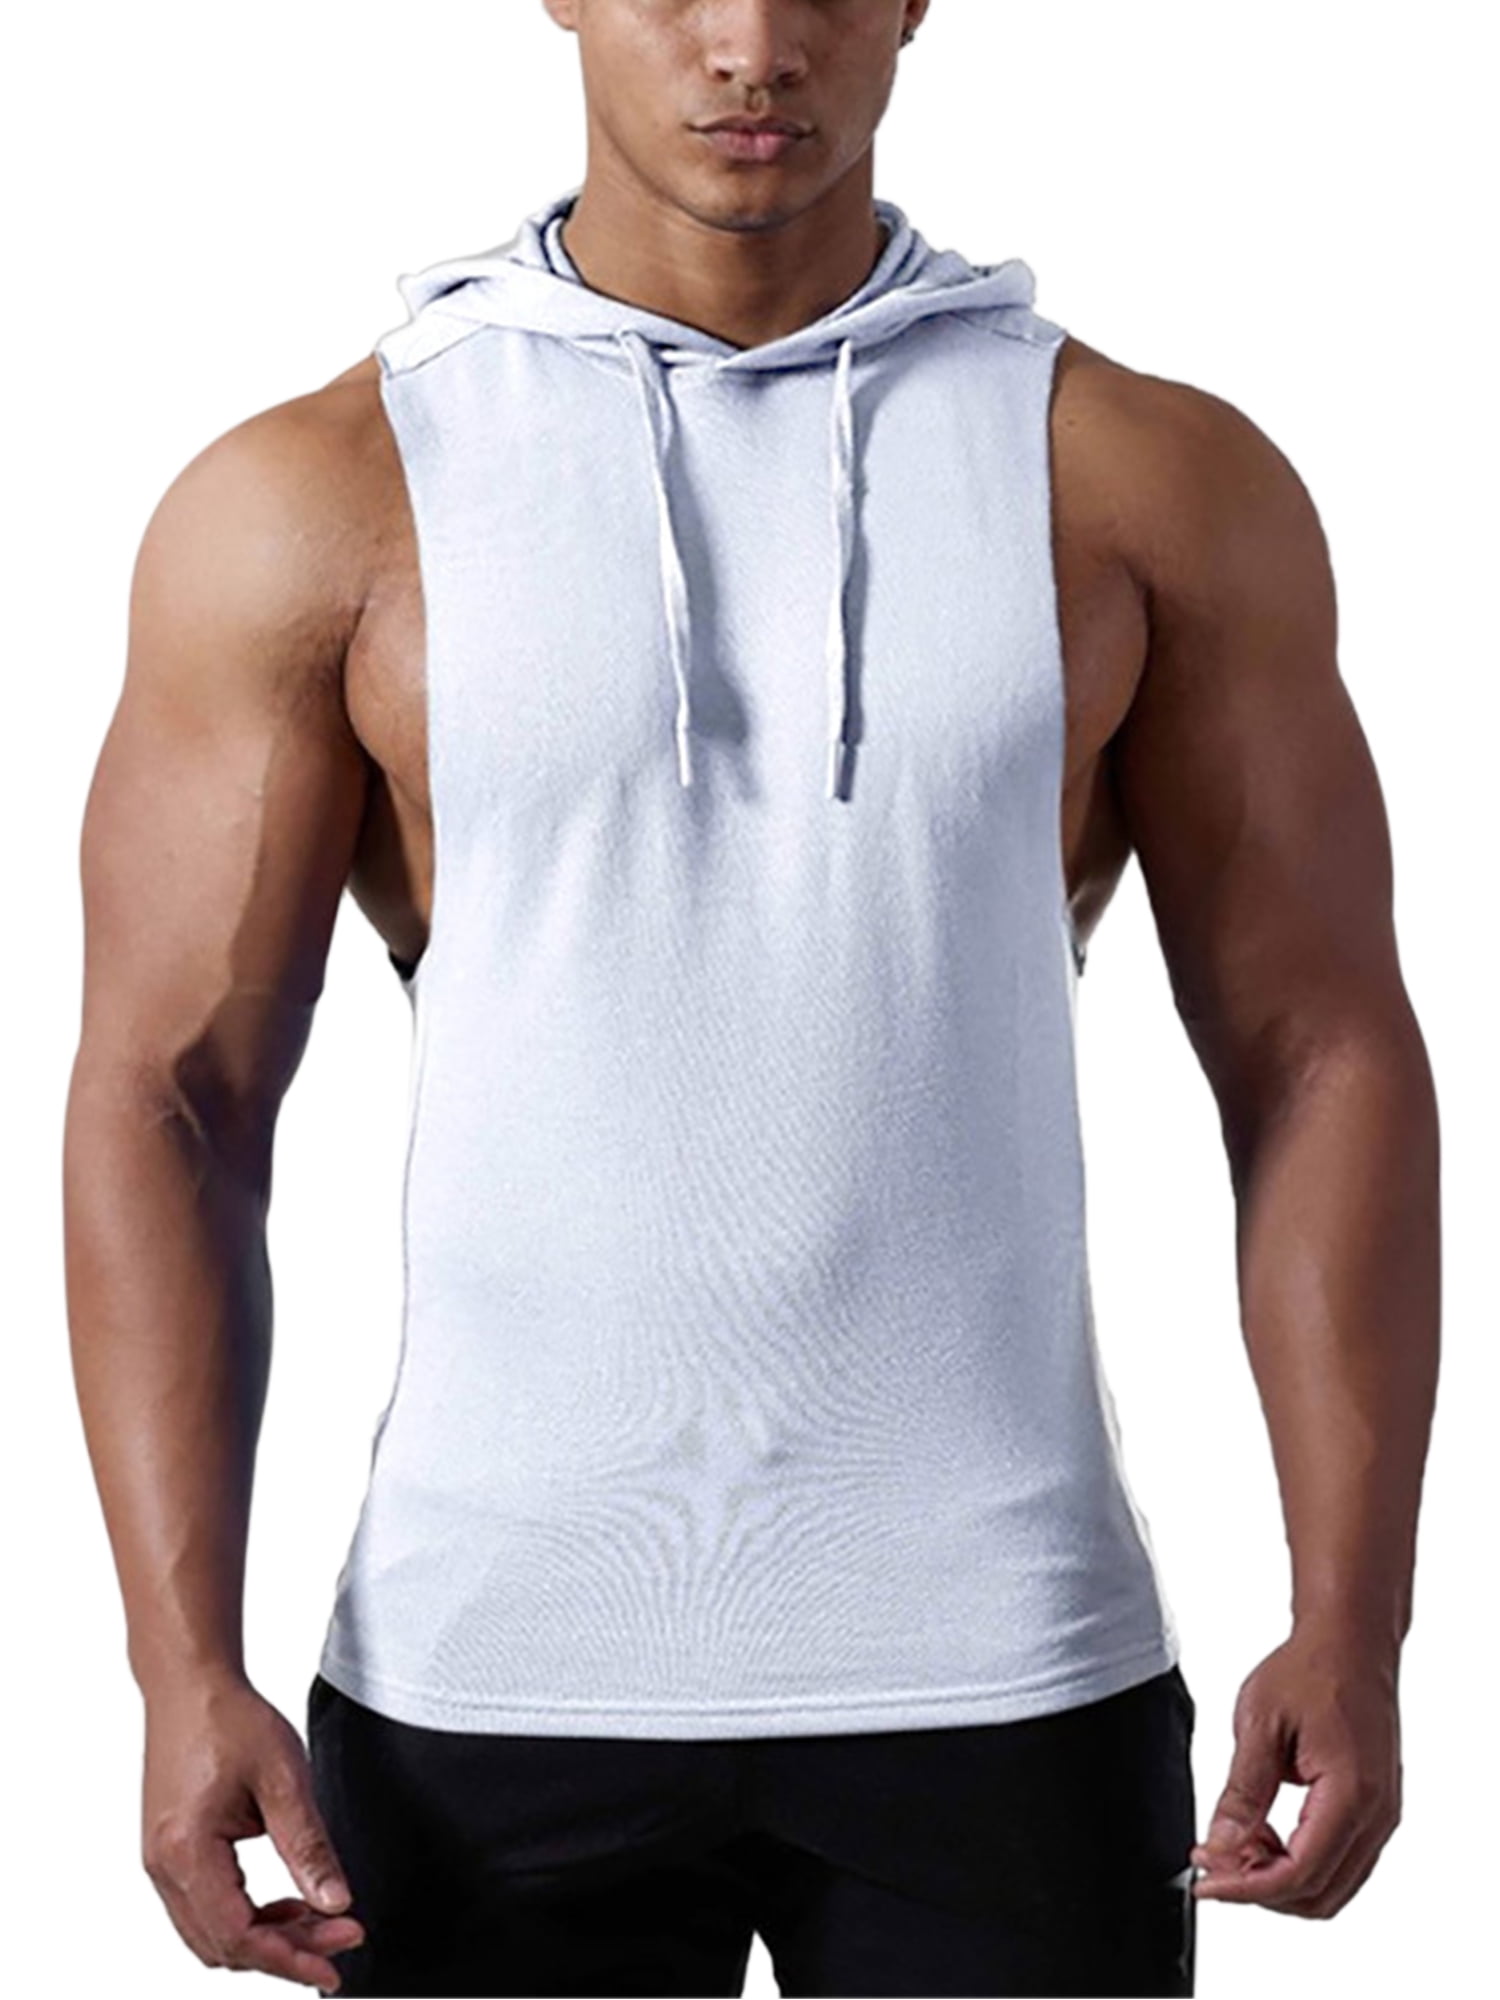 COOFANDY Men's Gym Vest Hoodie Zip Up Sleeveless Workout Shirts Bodybuilding Training Muscle Tops with Pockets 